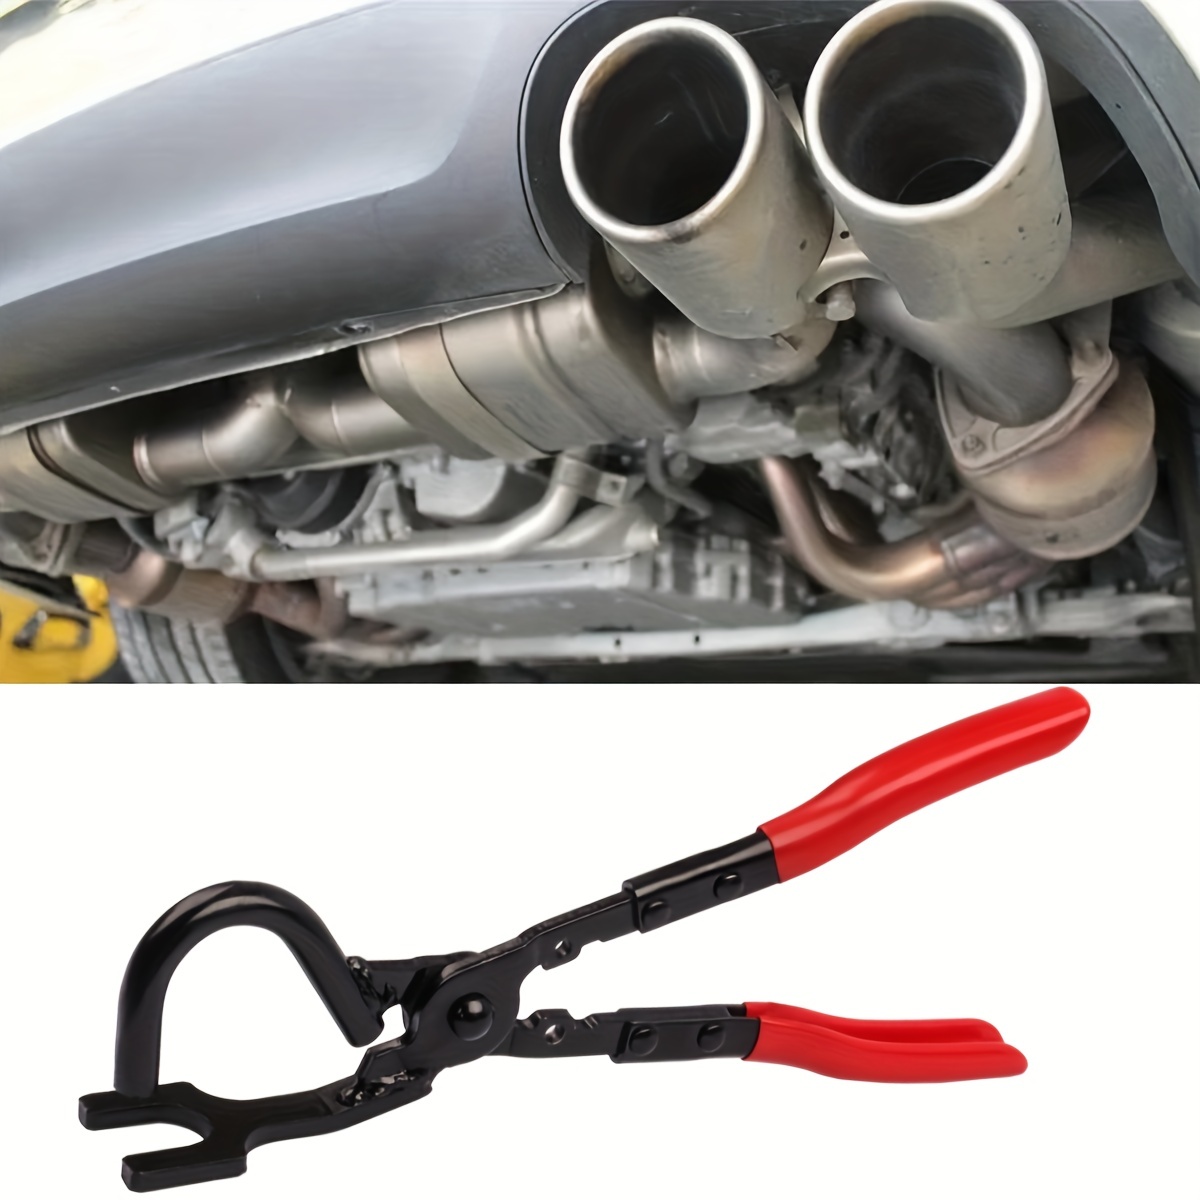 

Car Exhaust Hanger Disassembly Tool - Use All Compatible Pliers To Easily Separate The Exhaust Hanger And Rubber Bracket!